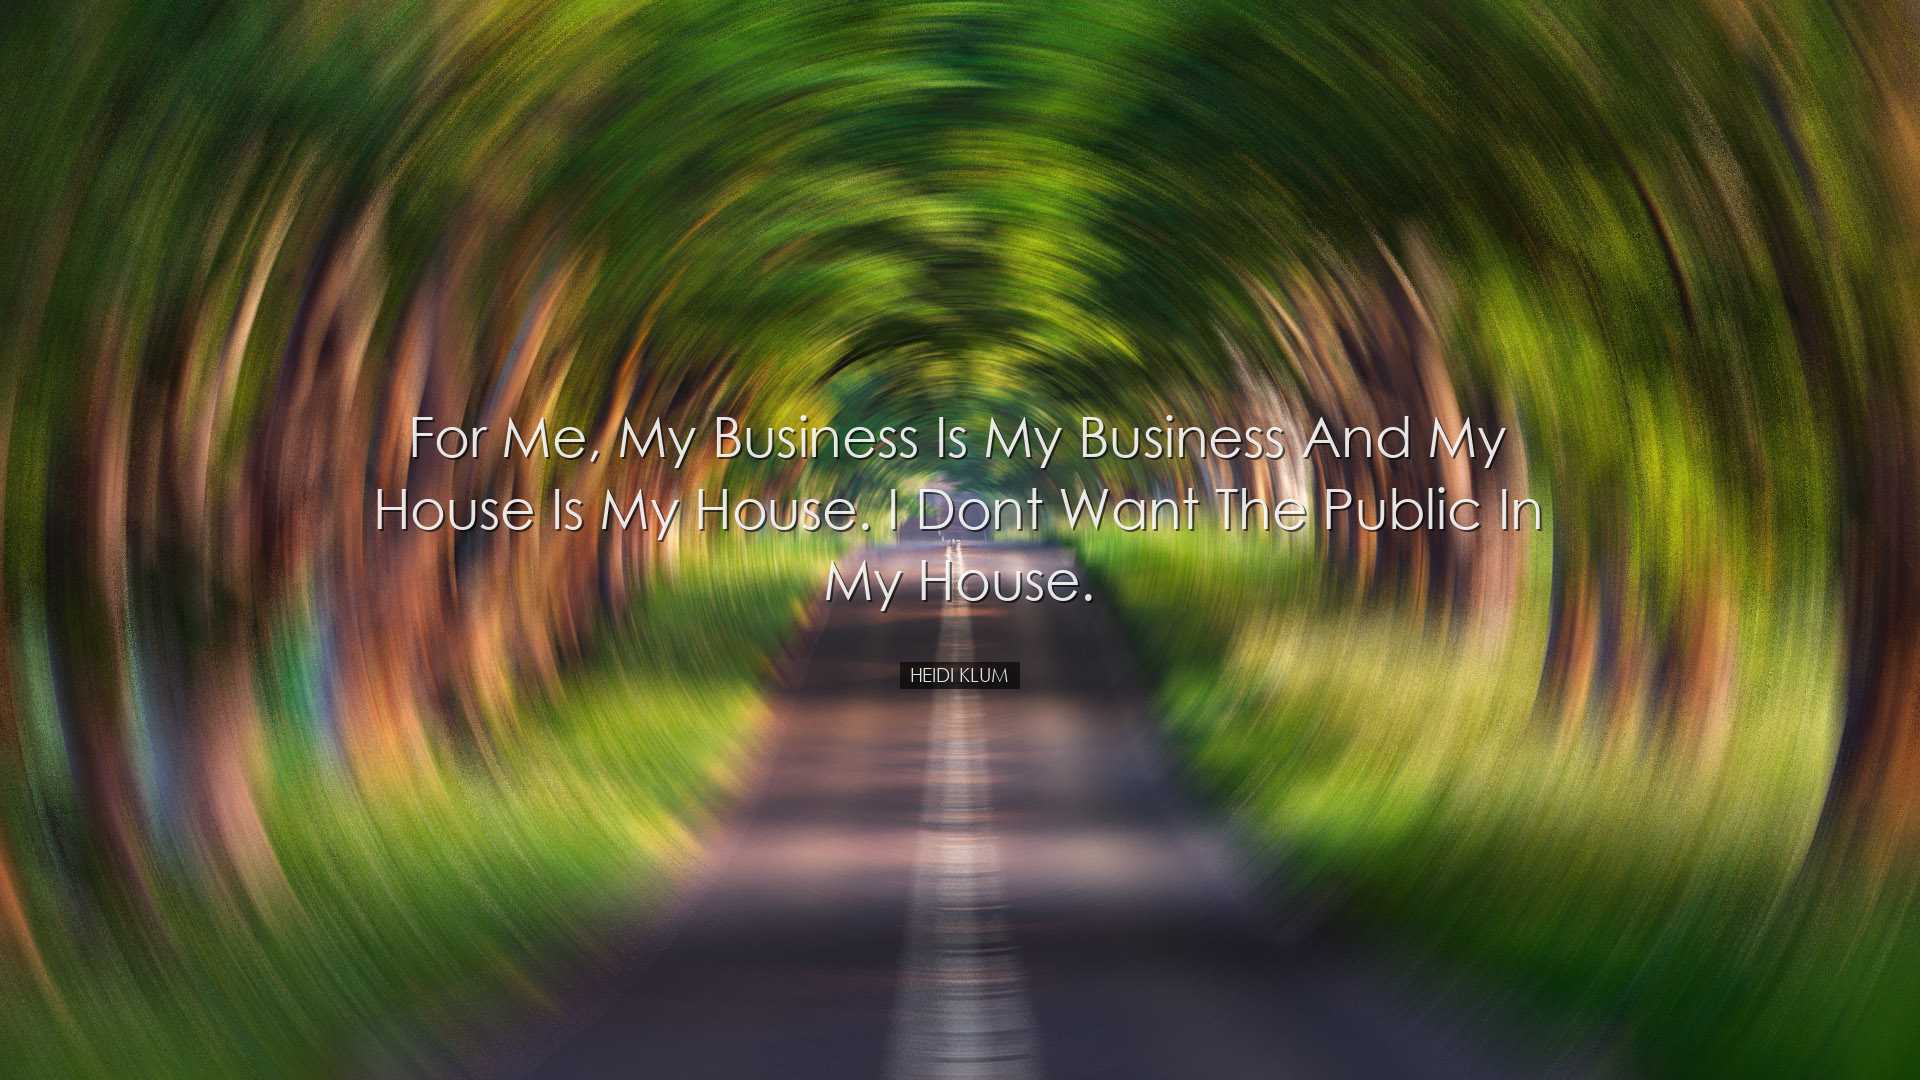 For me, my business is my business and my house is my house. I don